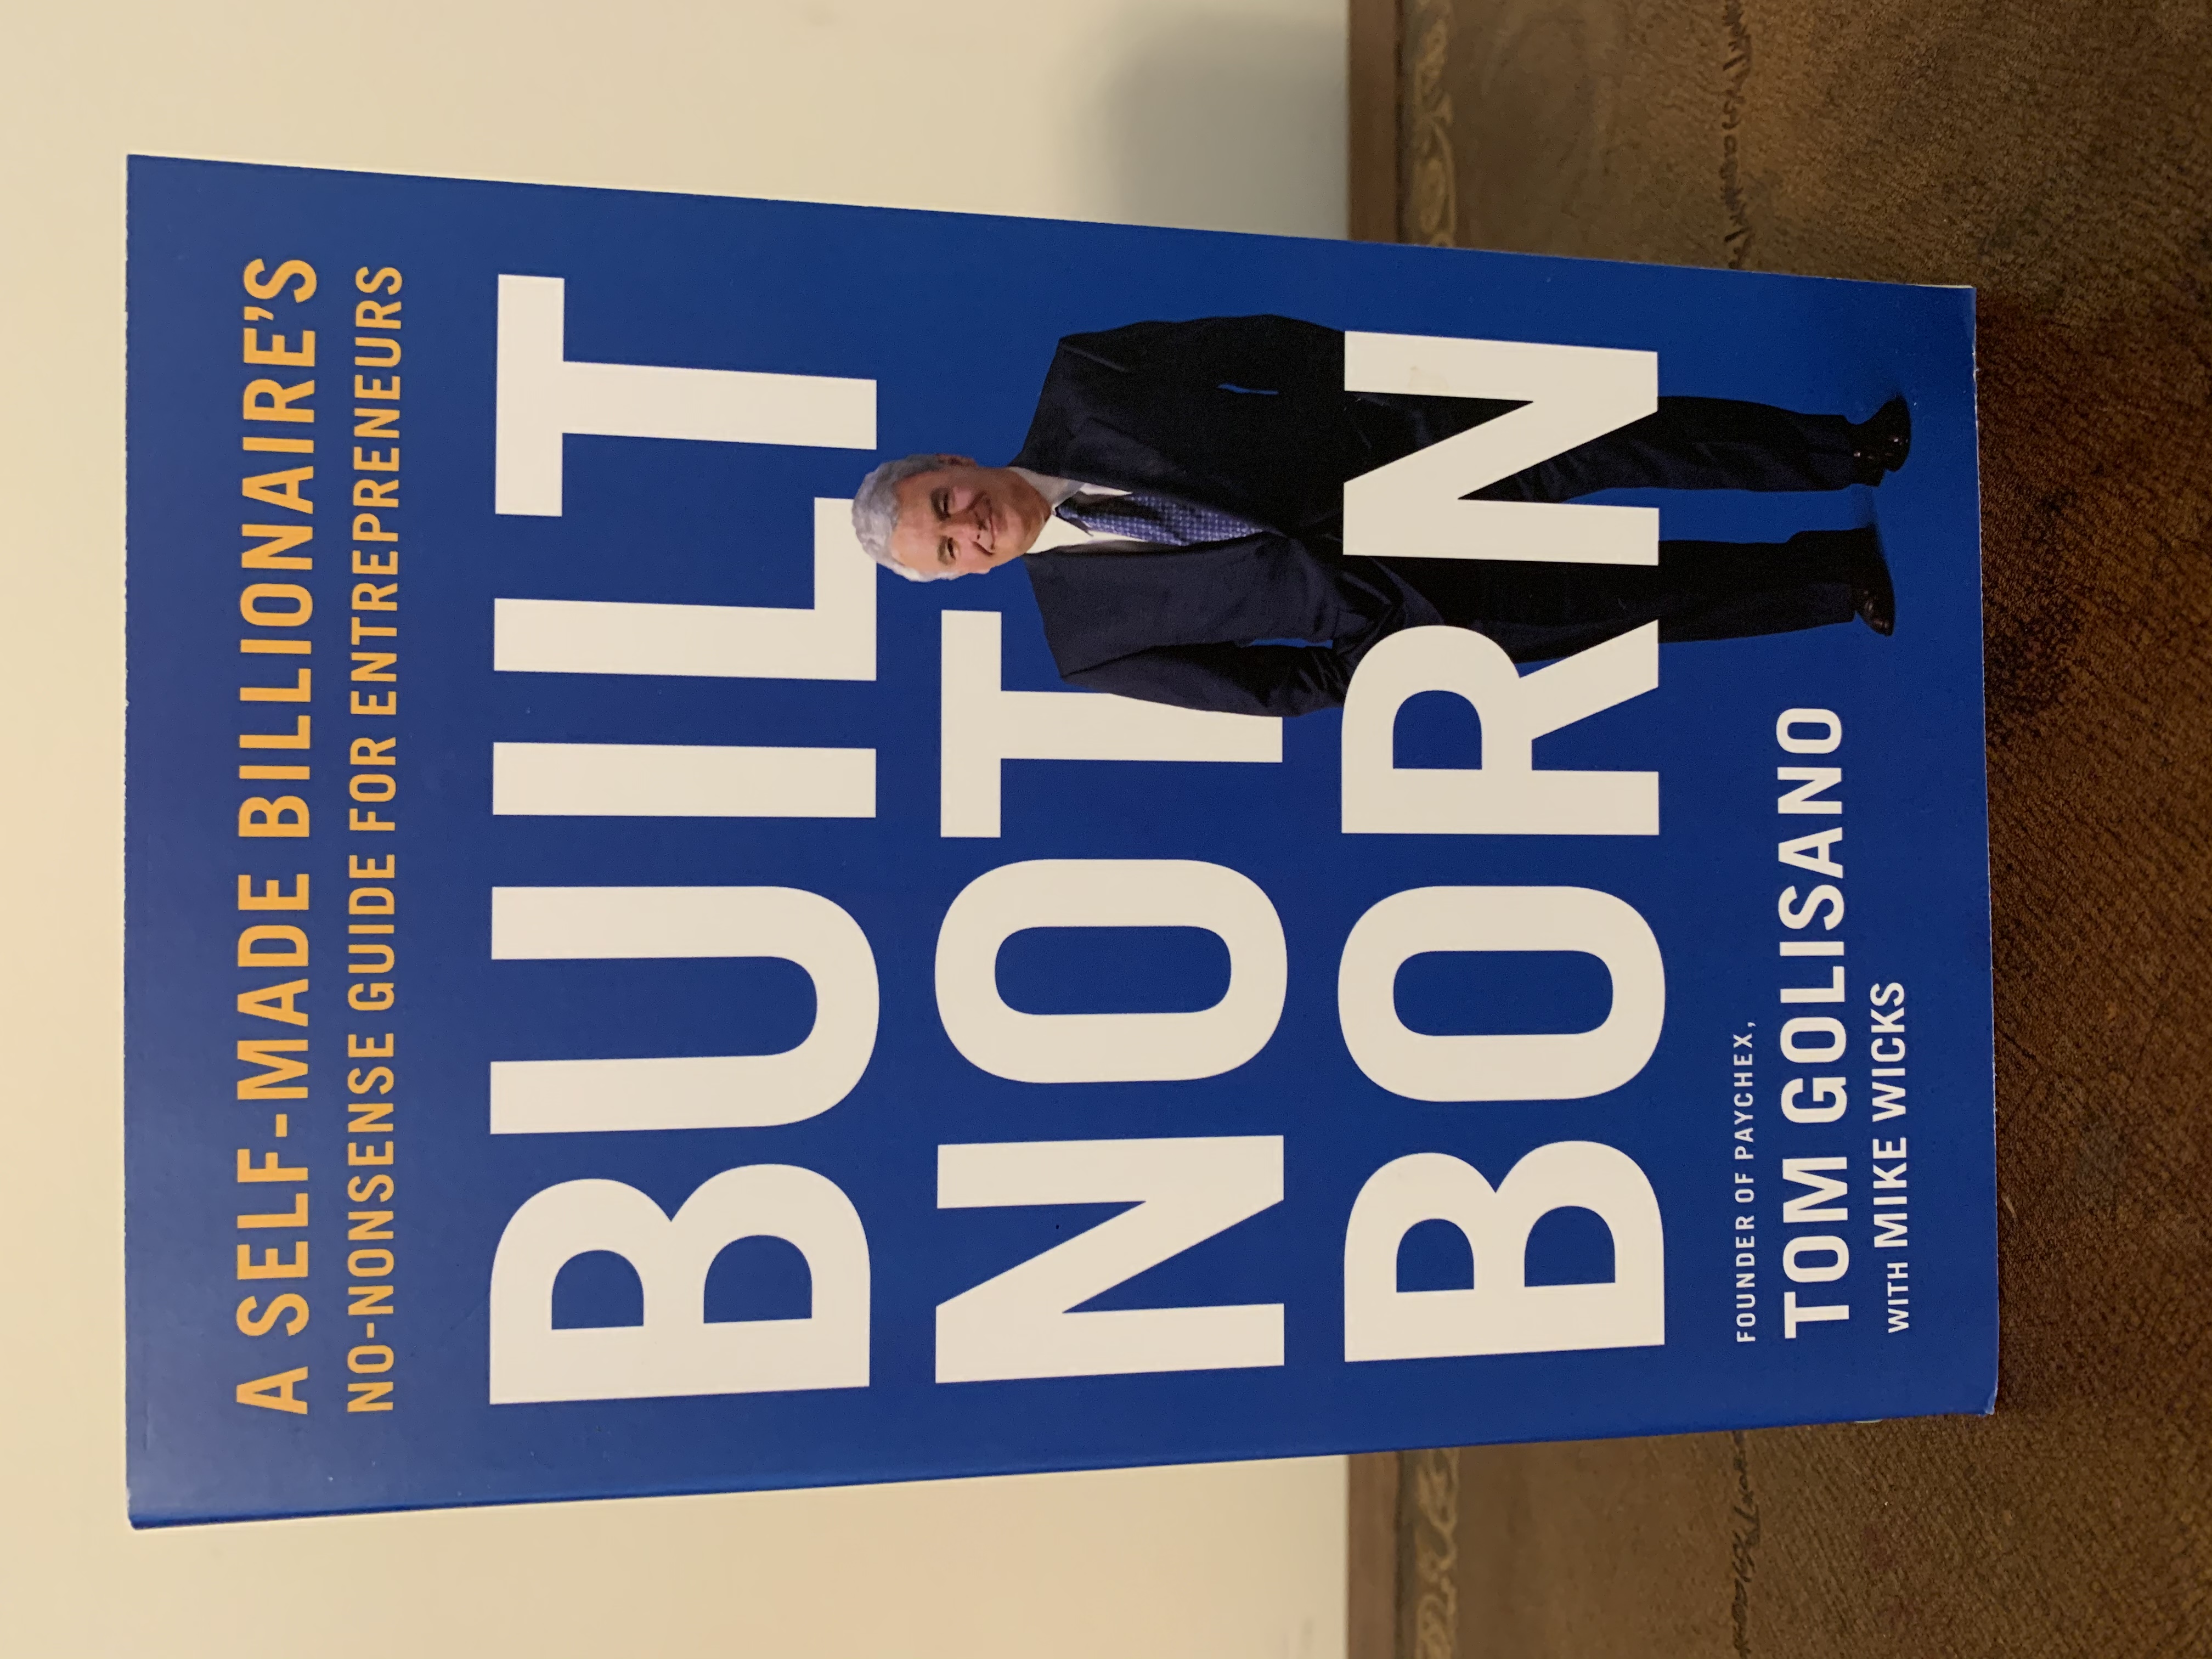 Built Not Born: A Self-Made Billionaire's No-Nonsense Guide For  Entrepreneurs [FIRST EDITION, FIRST PRINTING] de Golisano, Tom; Wicks,  Mike: New Soft cover (2019) 1st Edition